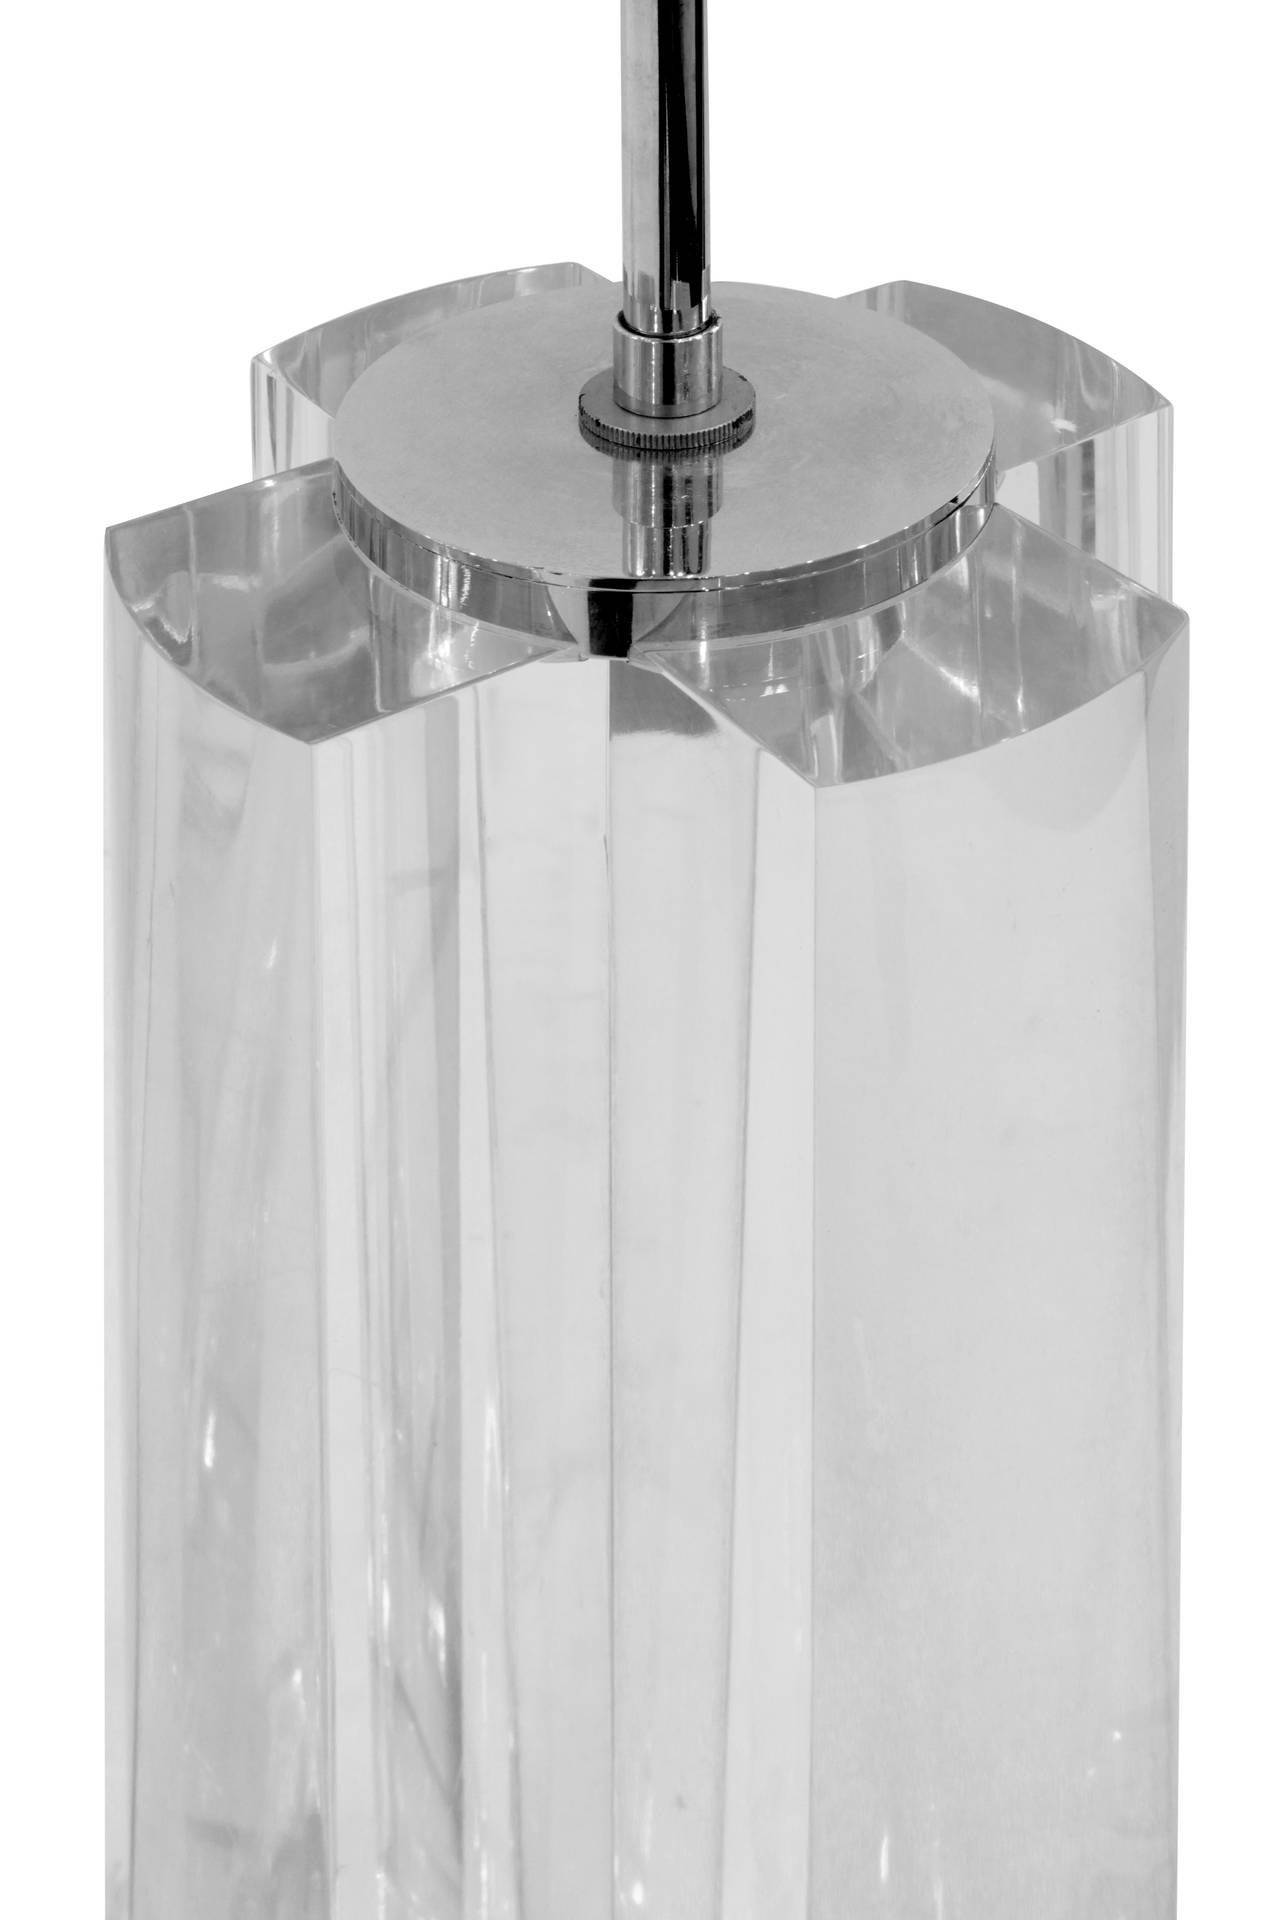 Sculptural Lucite block table lamp with polished stainless steel base and
accents in the manner of Karl Springer, American, 1980s. This lamp is beautifully made.